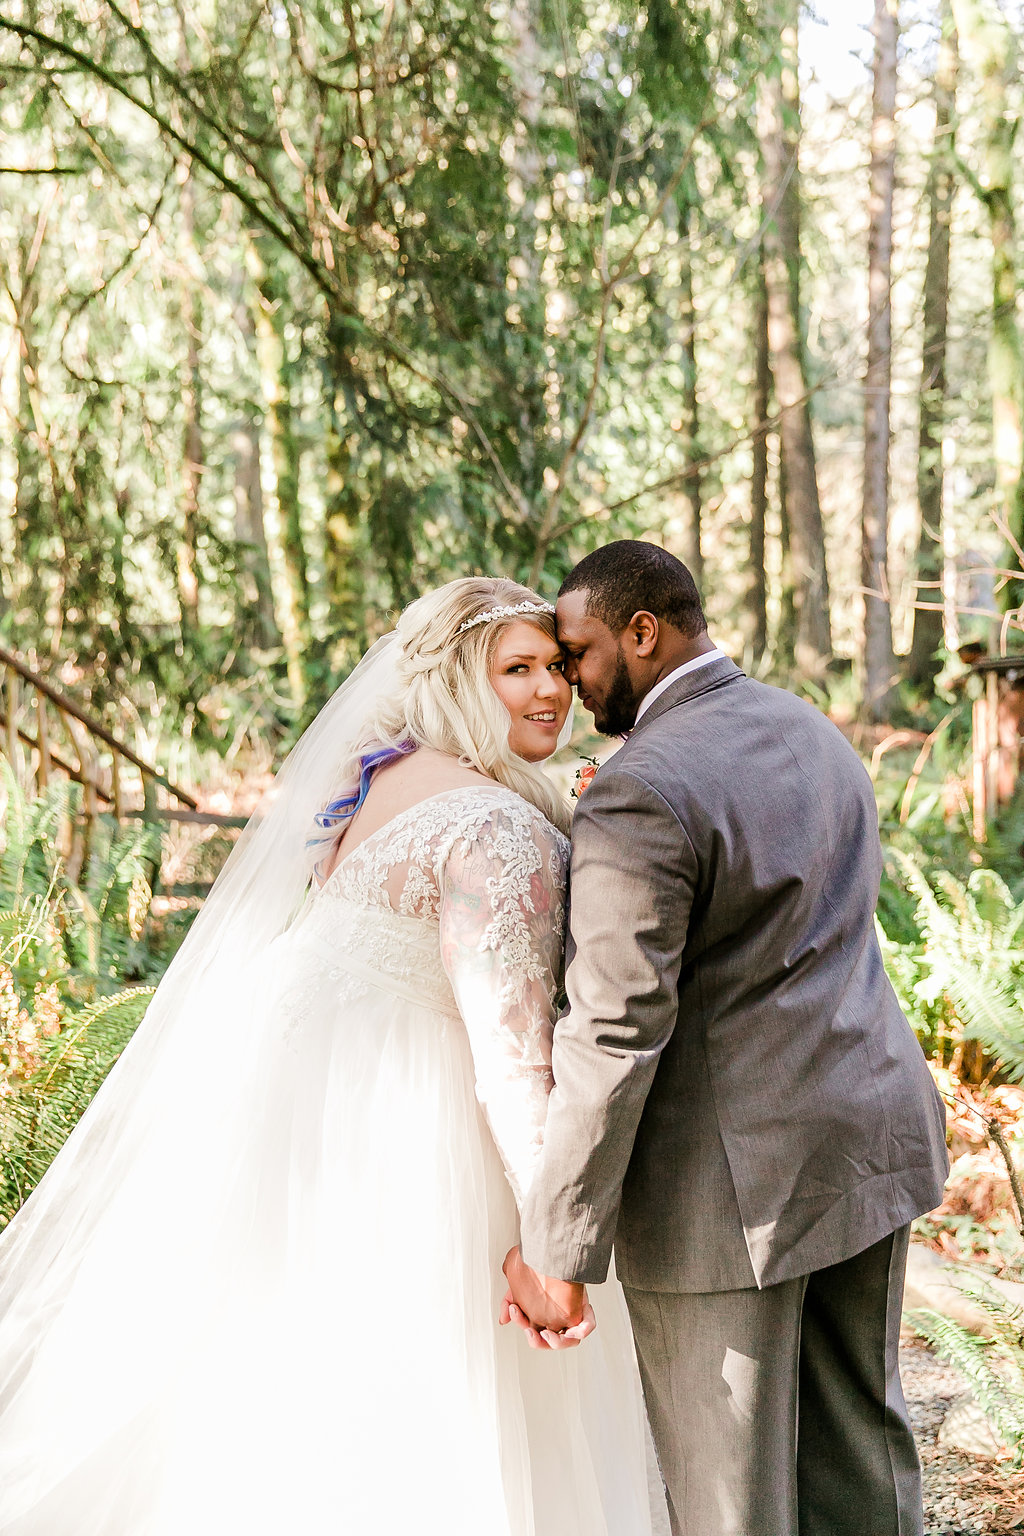 Stormy & Gary's Intimate Treehouse Elopement - Nelson Treehouse